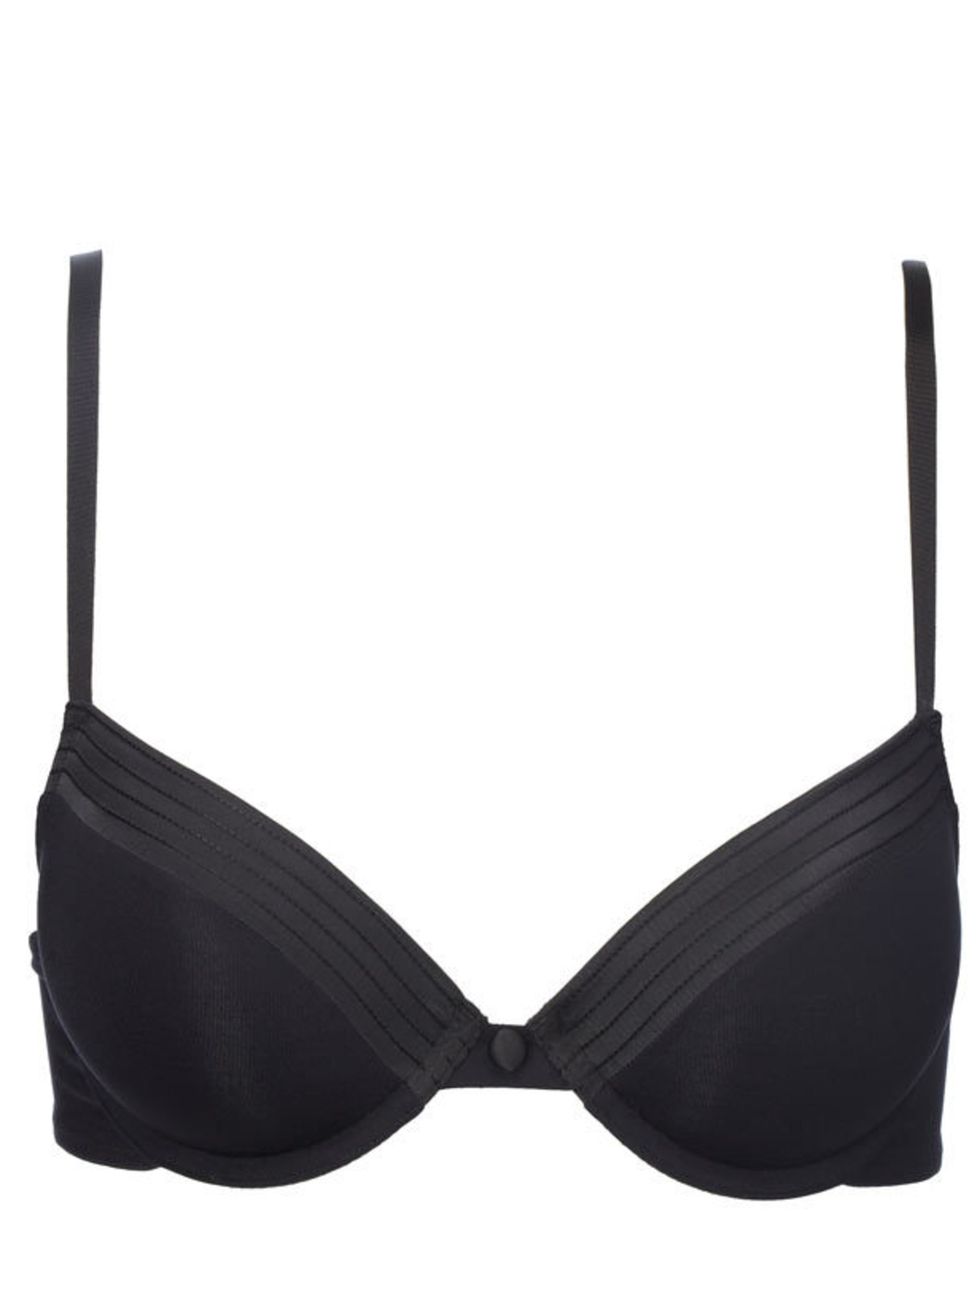 <p>Satin T-shirt bra, £14, by <a href="http://www.bhs.co.uk/mall/productpage.cfm/bhsstore/234270">BHS</a></p>